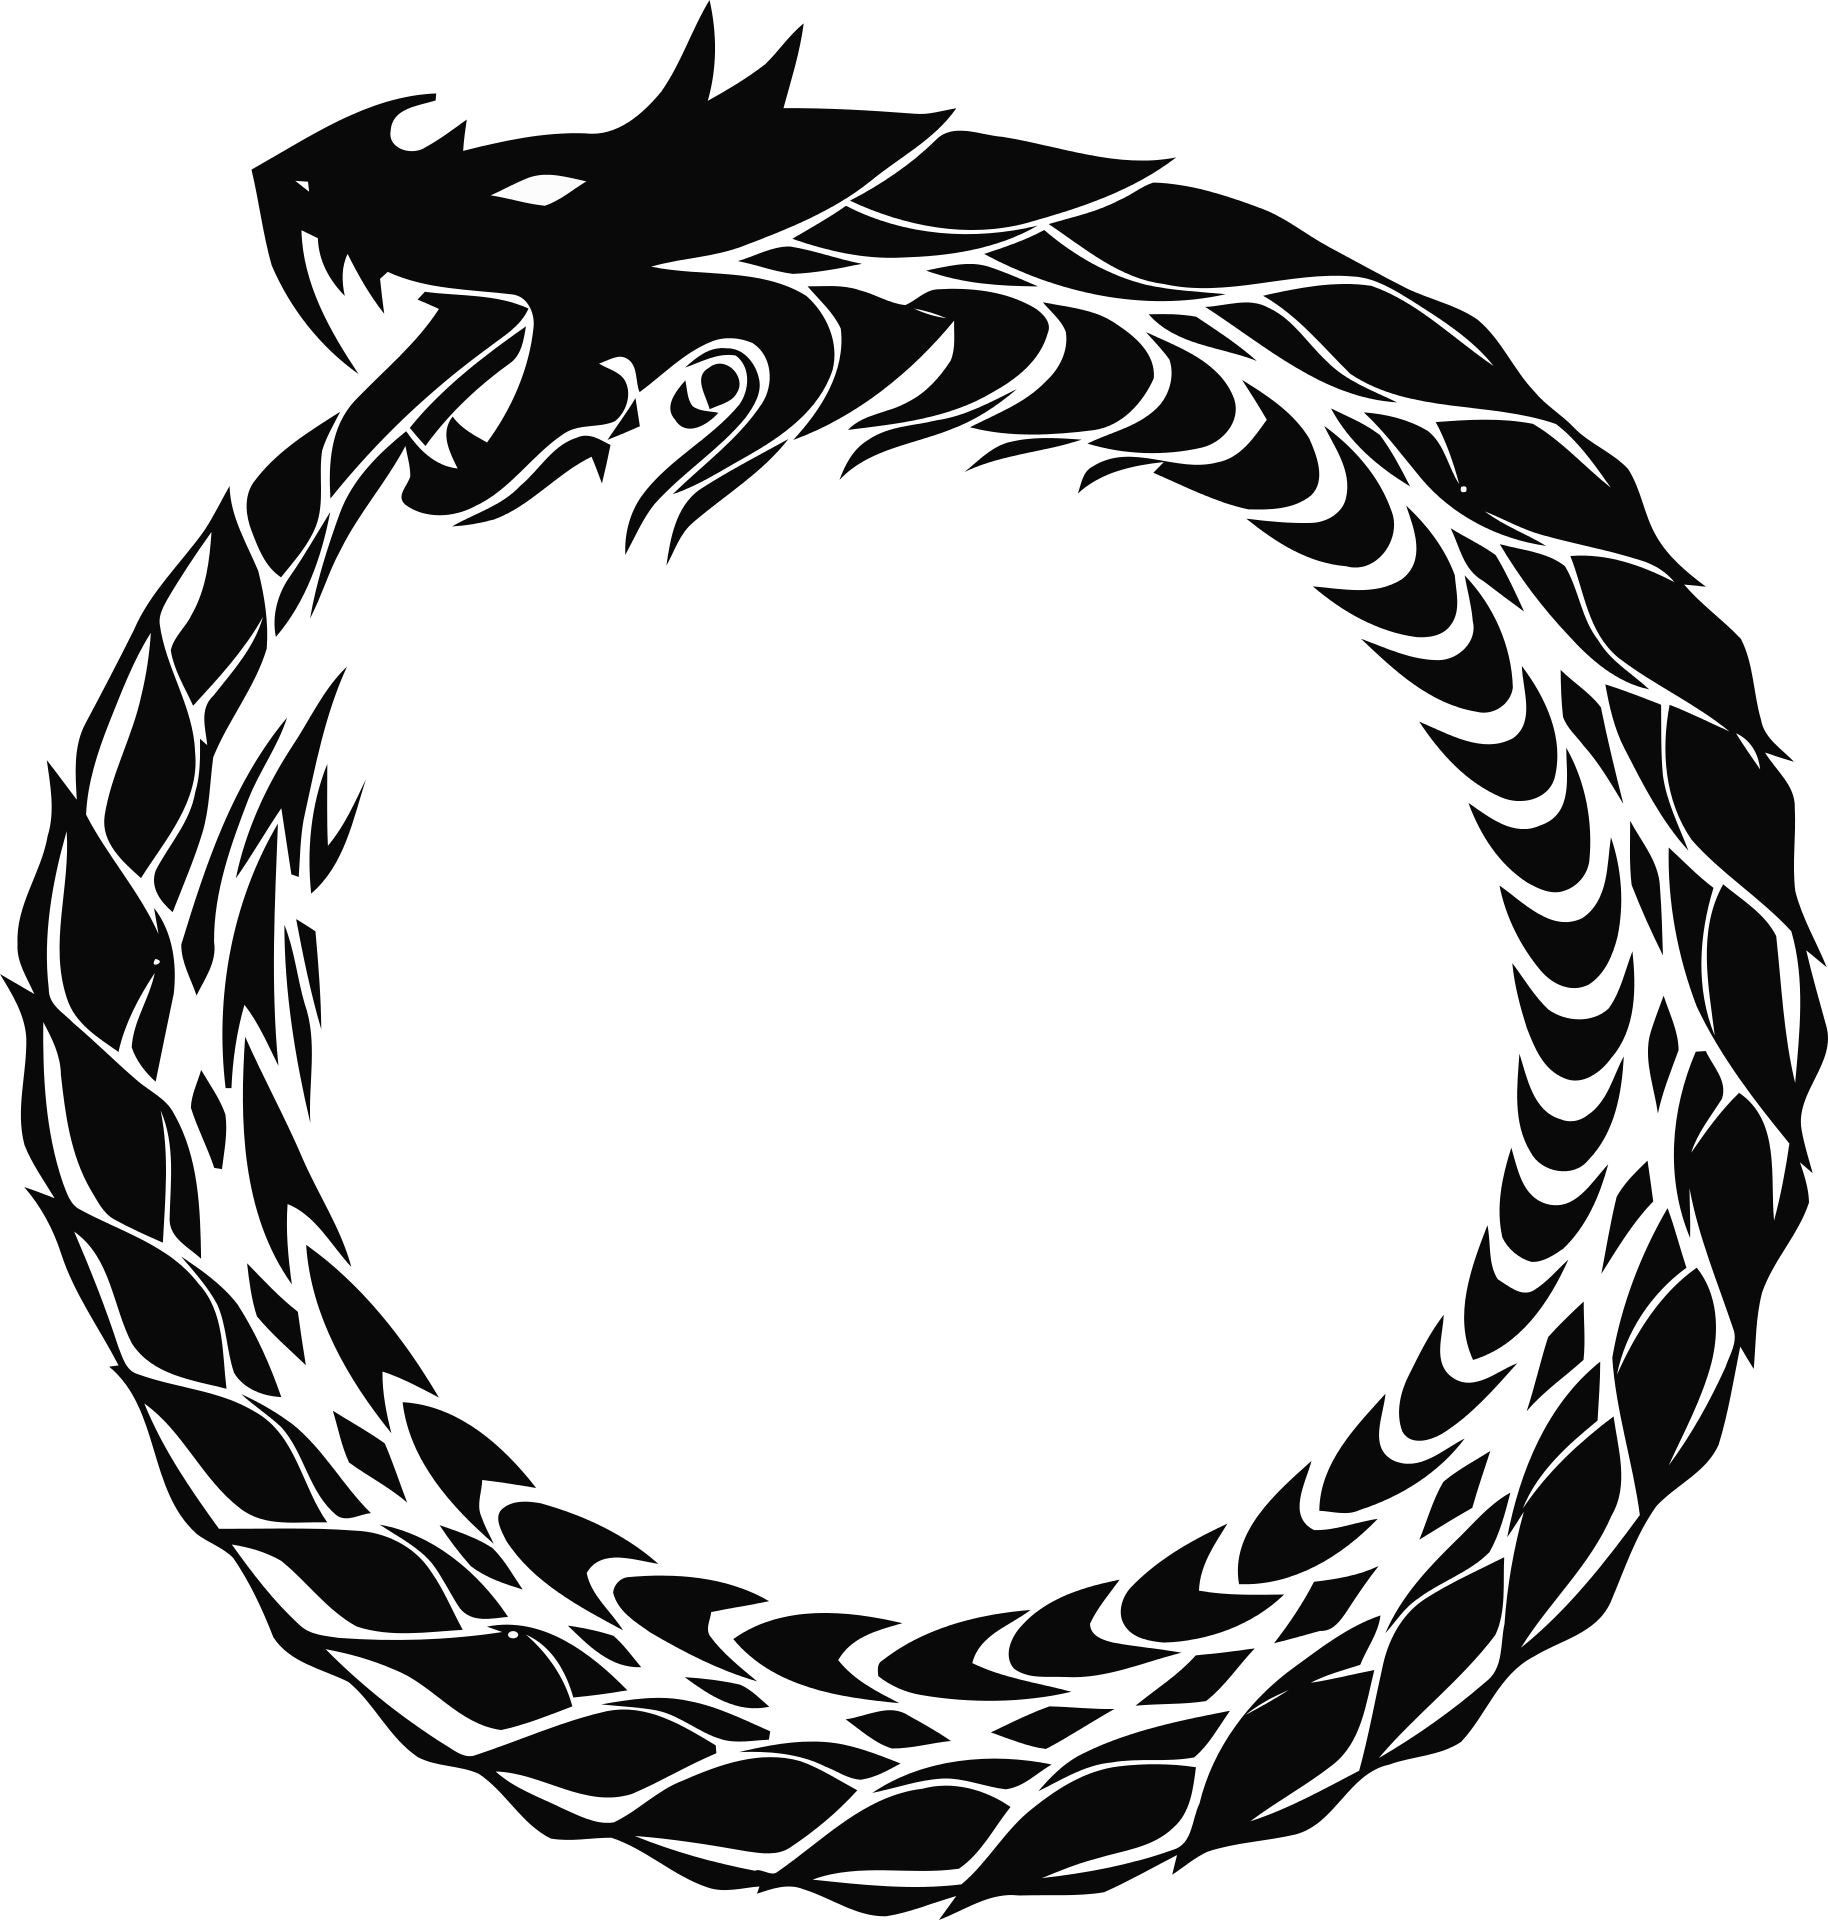 Ouroboros Scalable Vector Graphics Clip Art - Dragon Eating Its Own Tail (1828x1920)